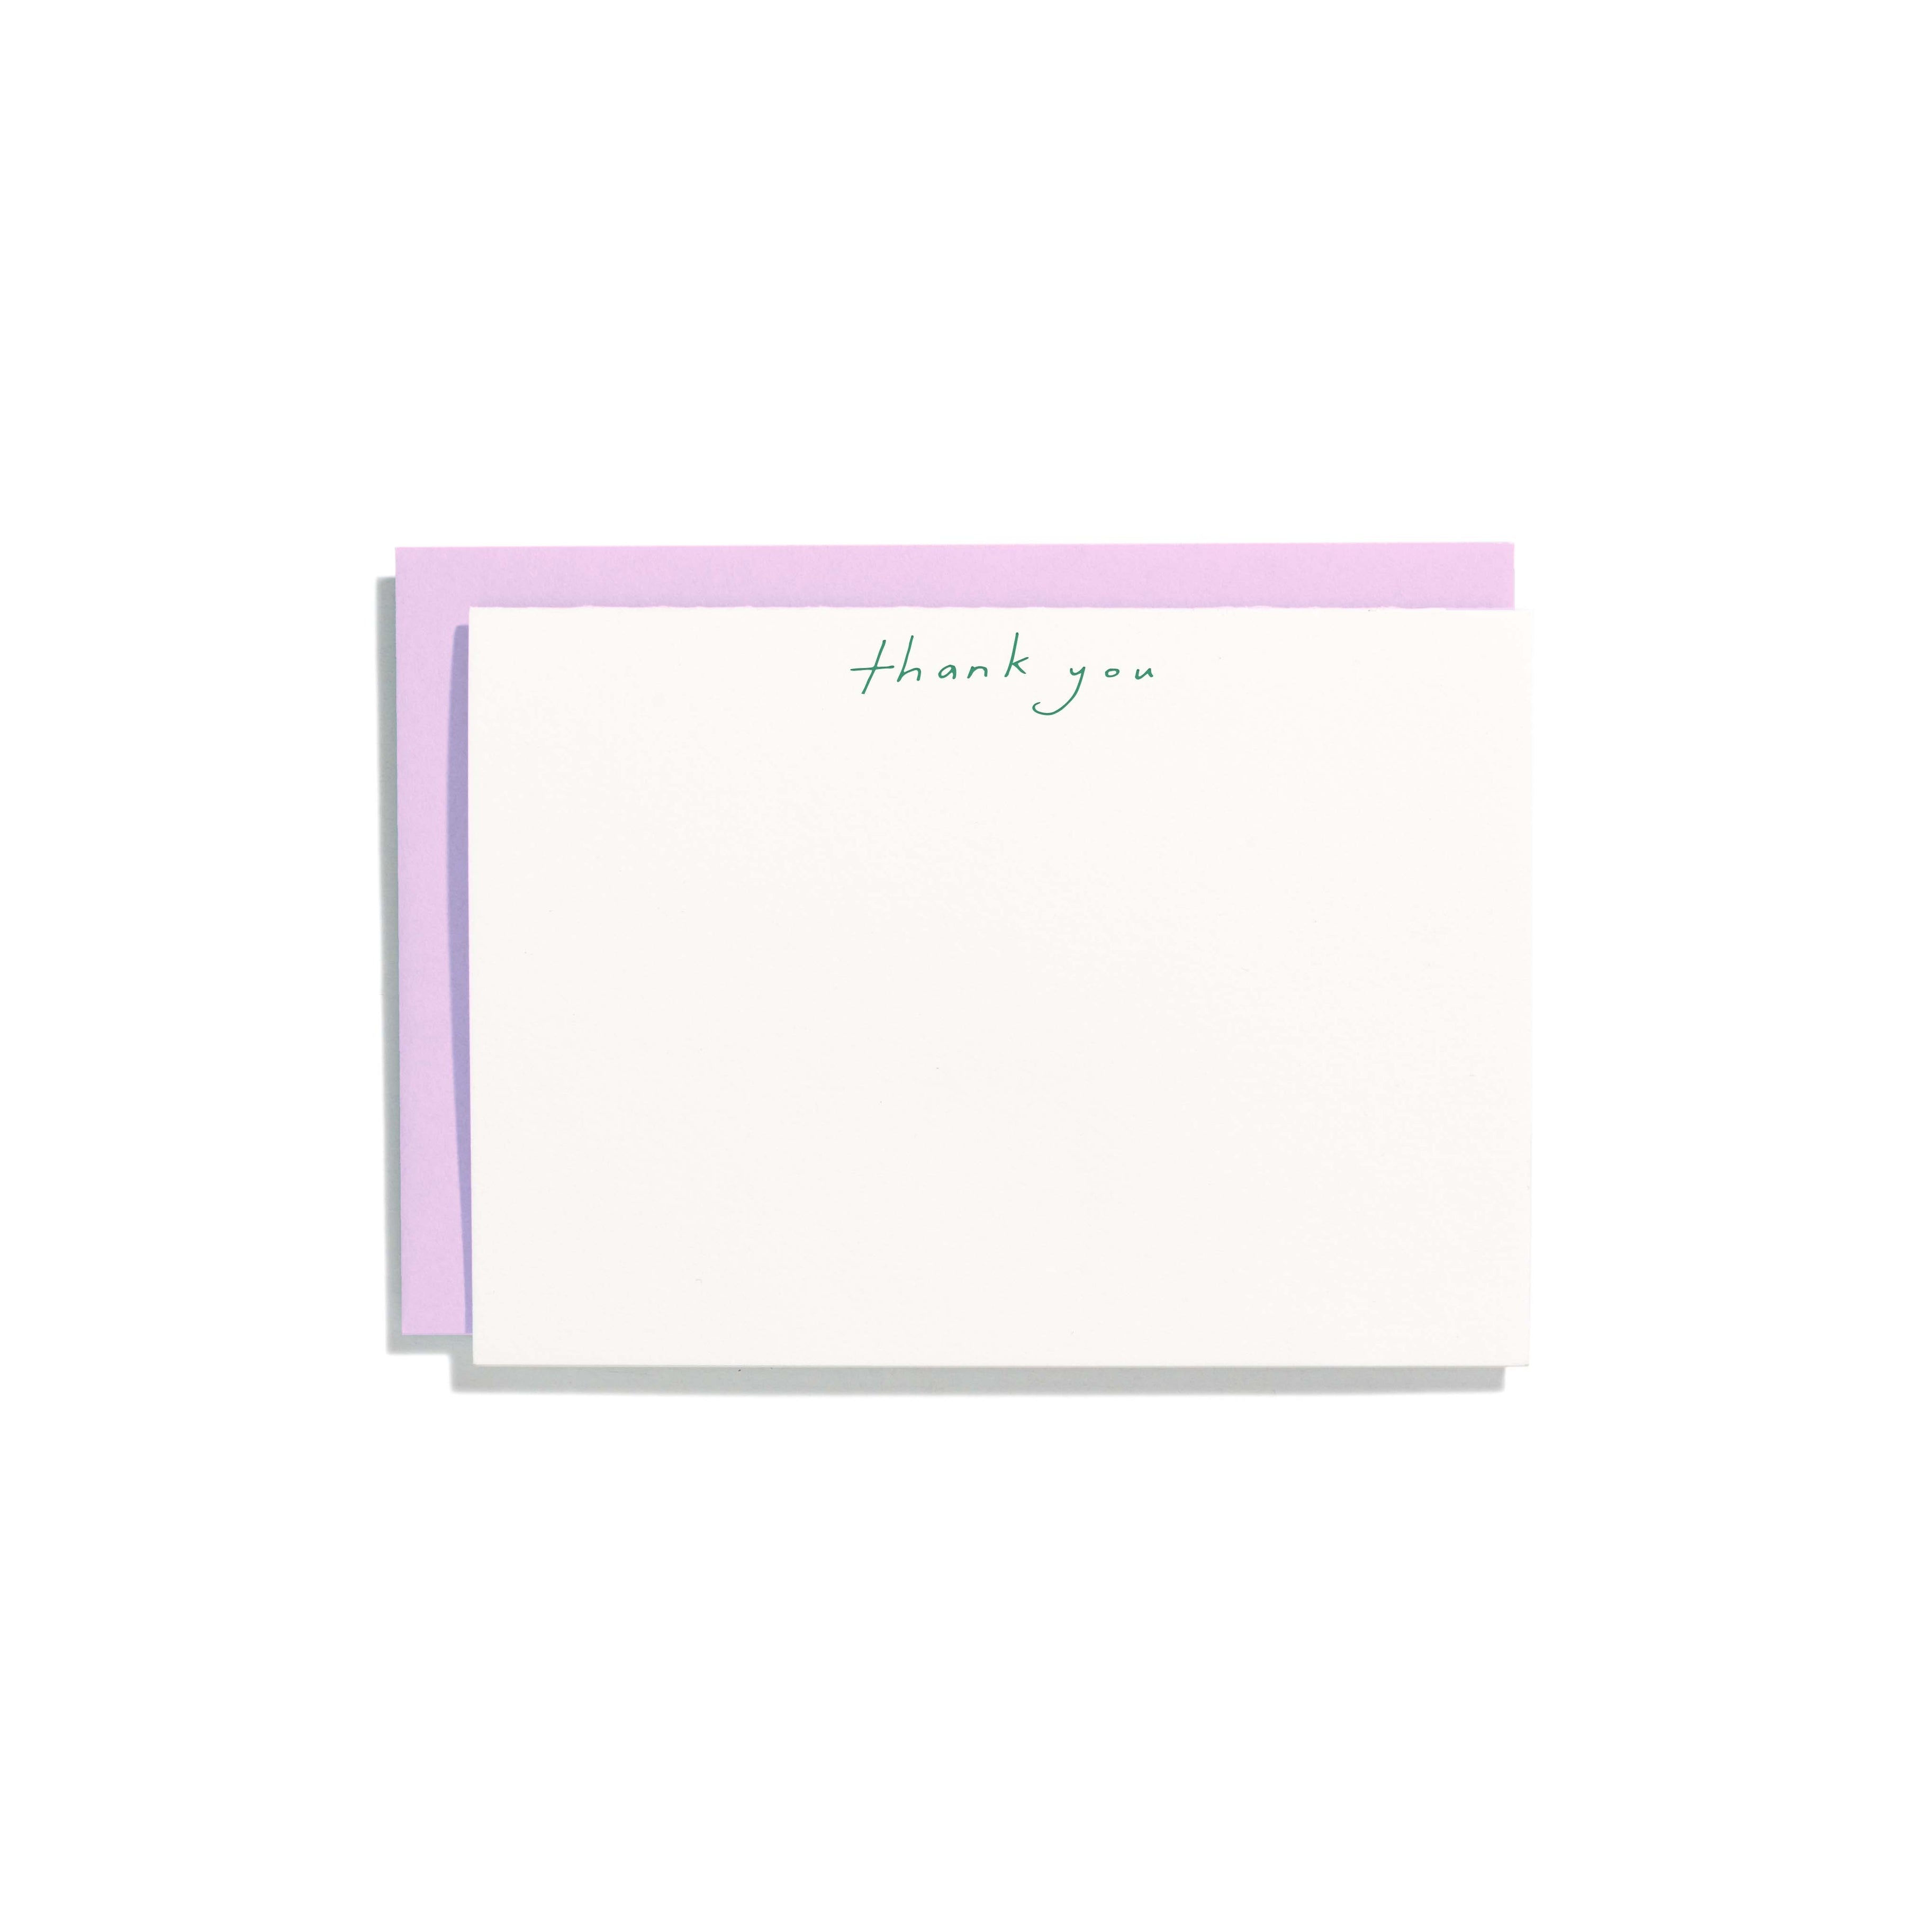 Ivory background with green text at top of card says, “Thank you”. Lavender envelopes included. 